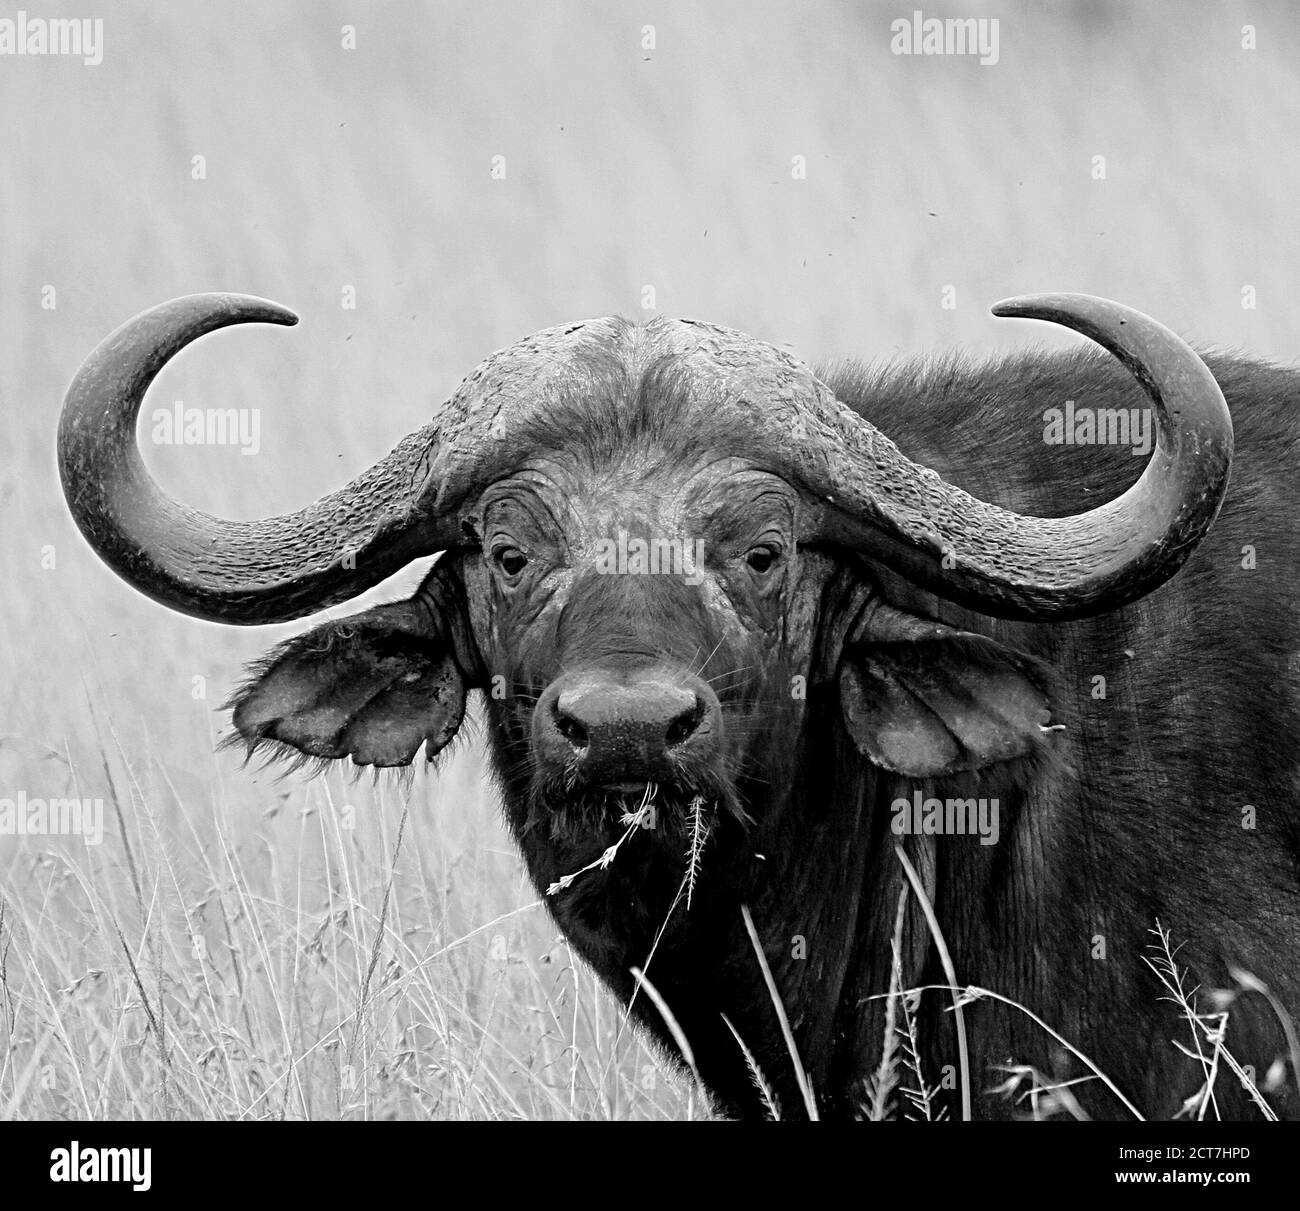 Wild Cape Buffalo face in black and white looking directly into camera Stock Photo